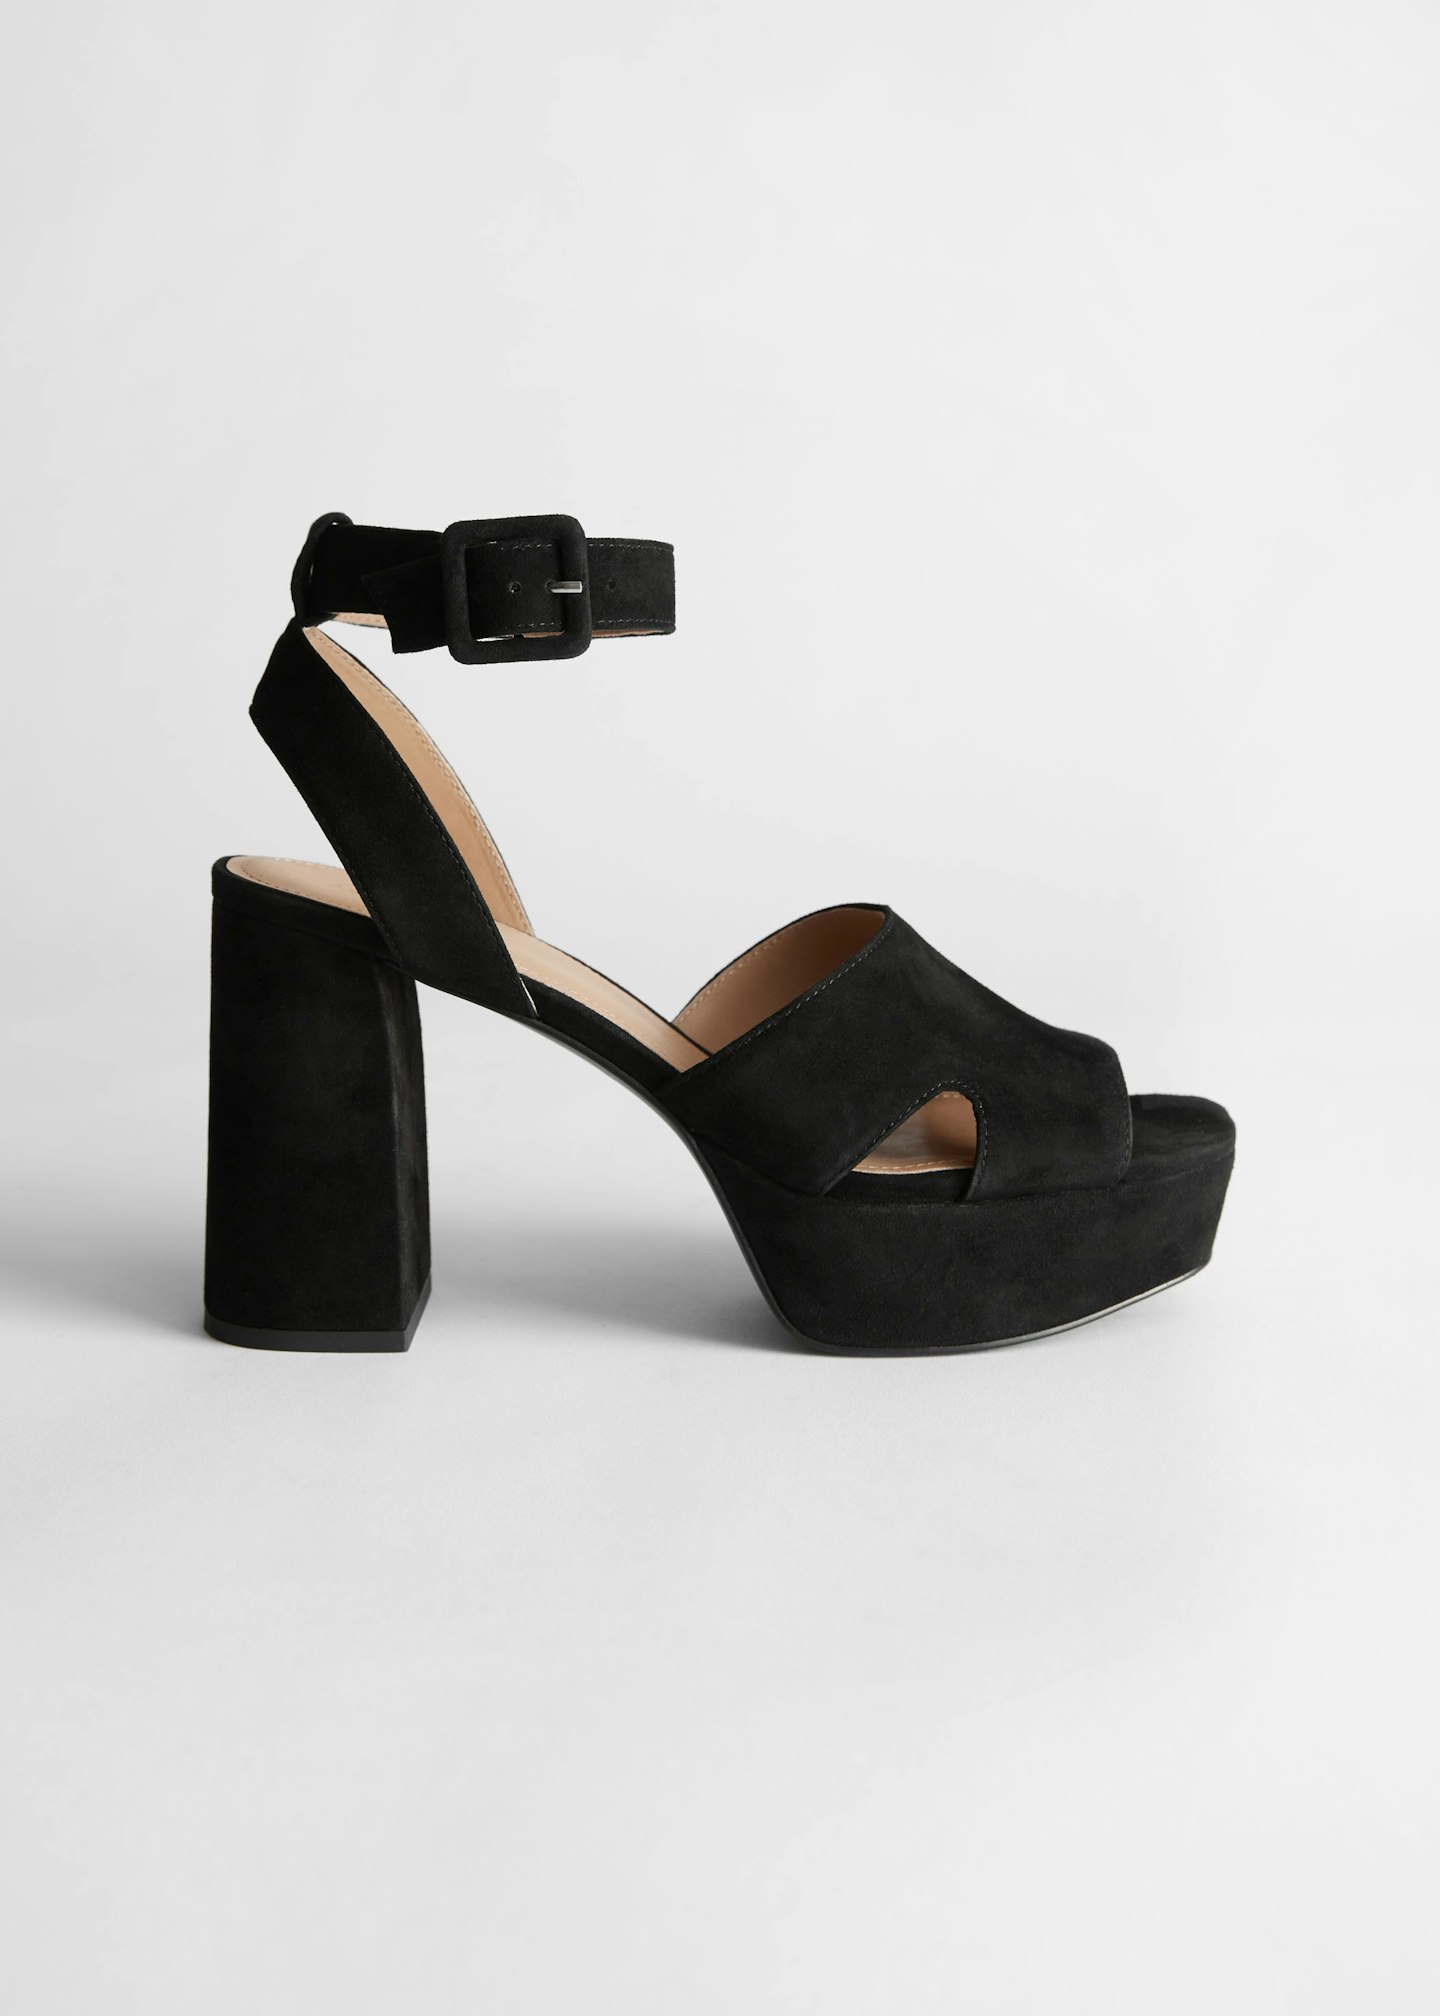 & Other Stories, Suede Heeled Platform Shoes, £85